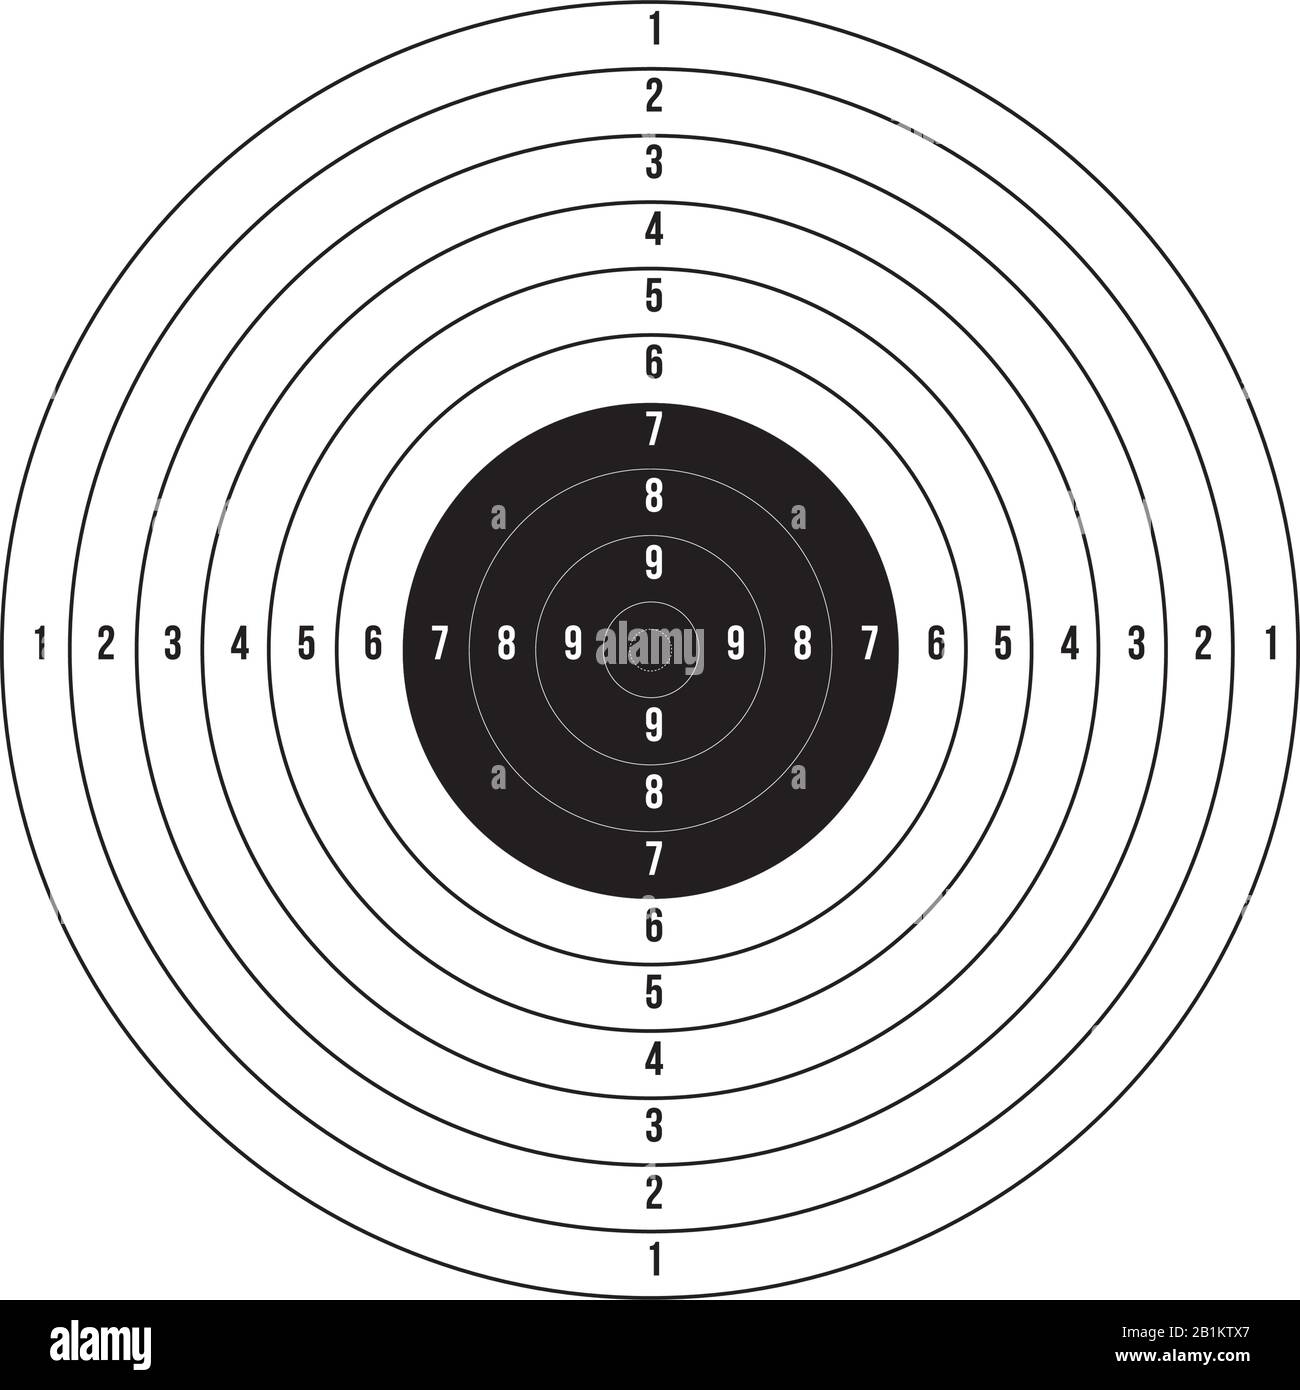 issf 10 meter air pistol olympic shooting archery target printable stock vector illustration isolated on white background stock vector image art alamy